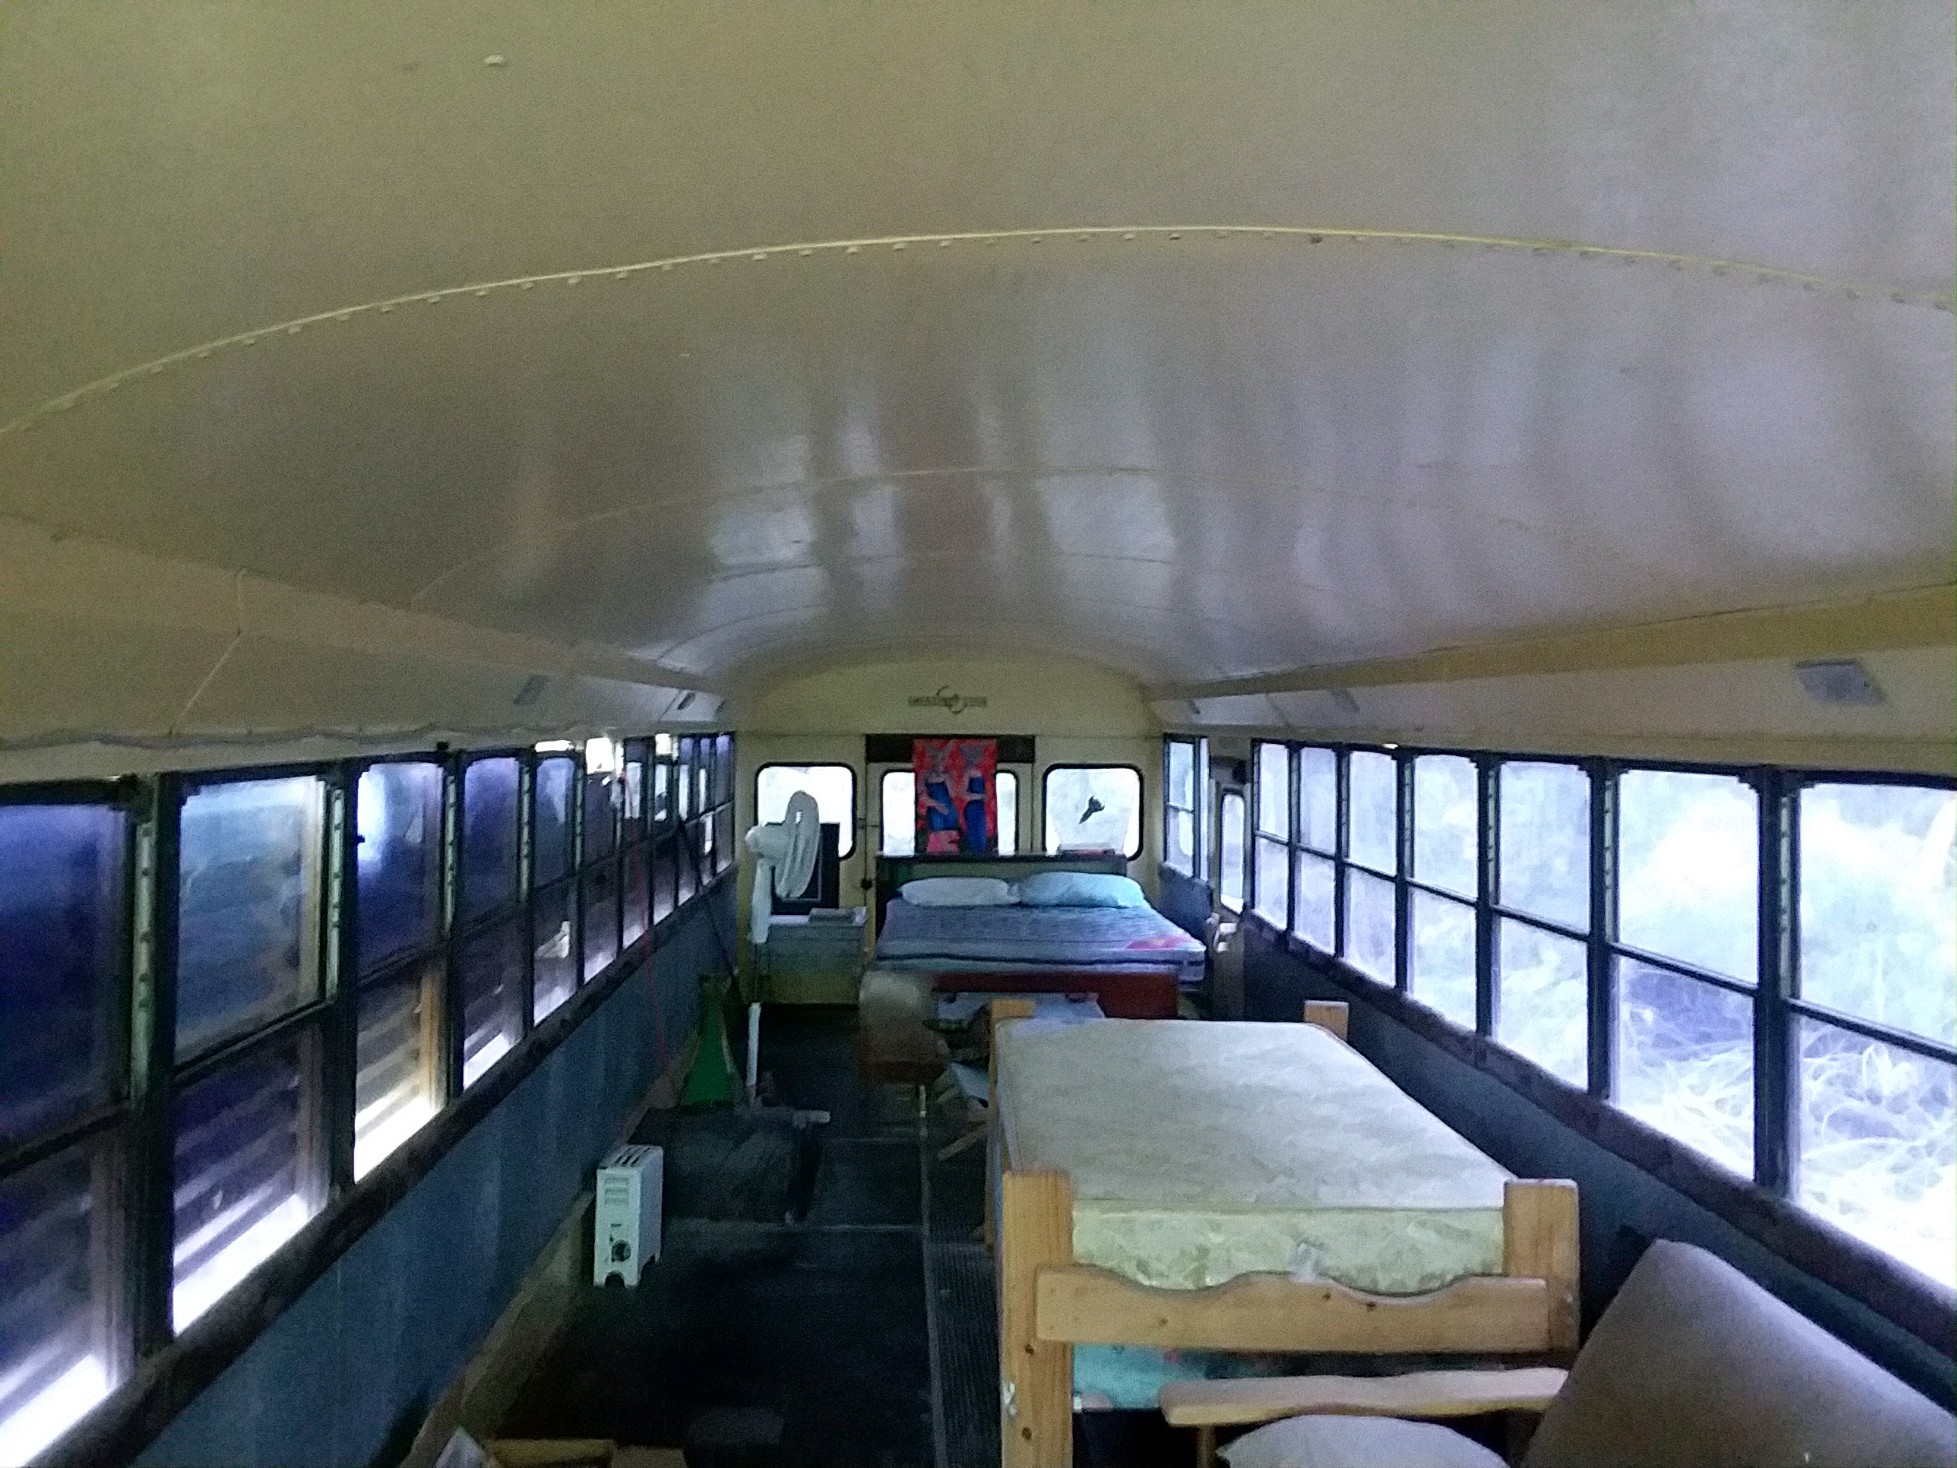 Stay in a Converted School Bus